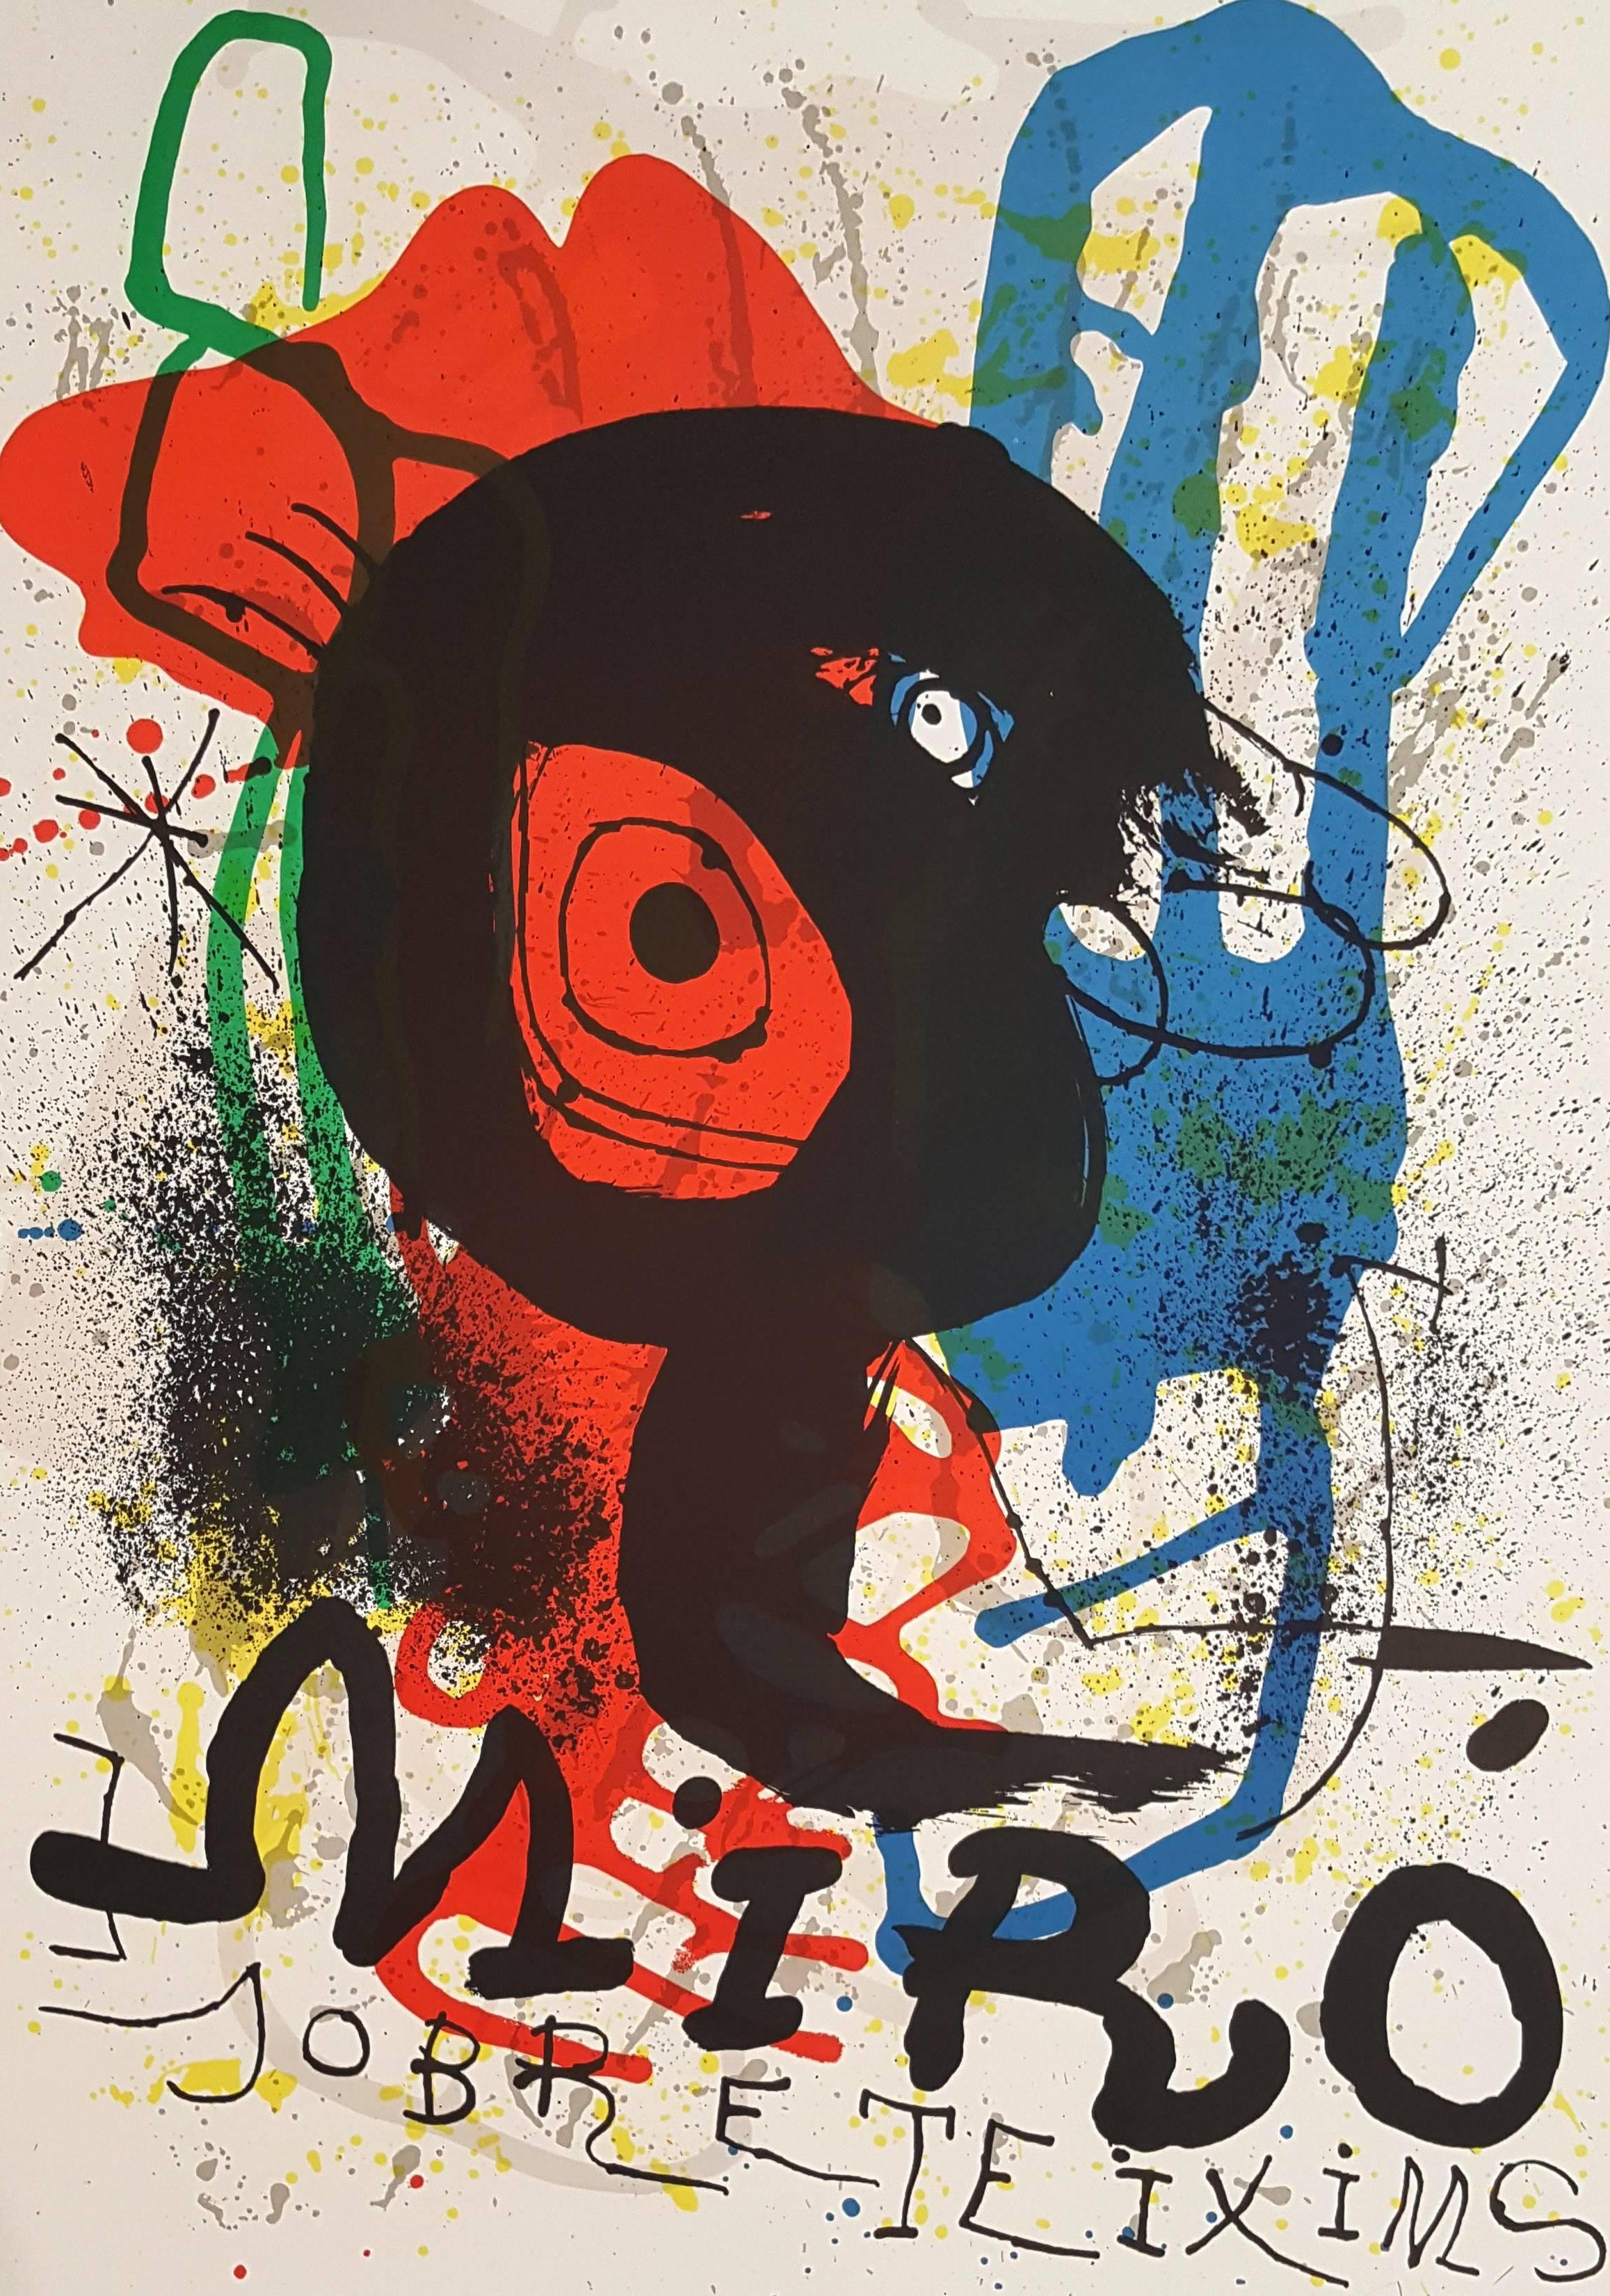 Joan Miró Abstract Print - Sobreteixims - Original Lithograph Handsigned and Numbered 